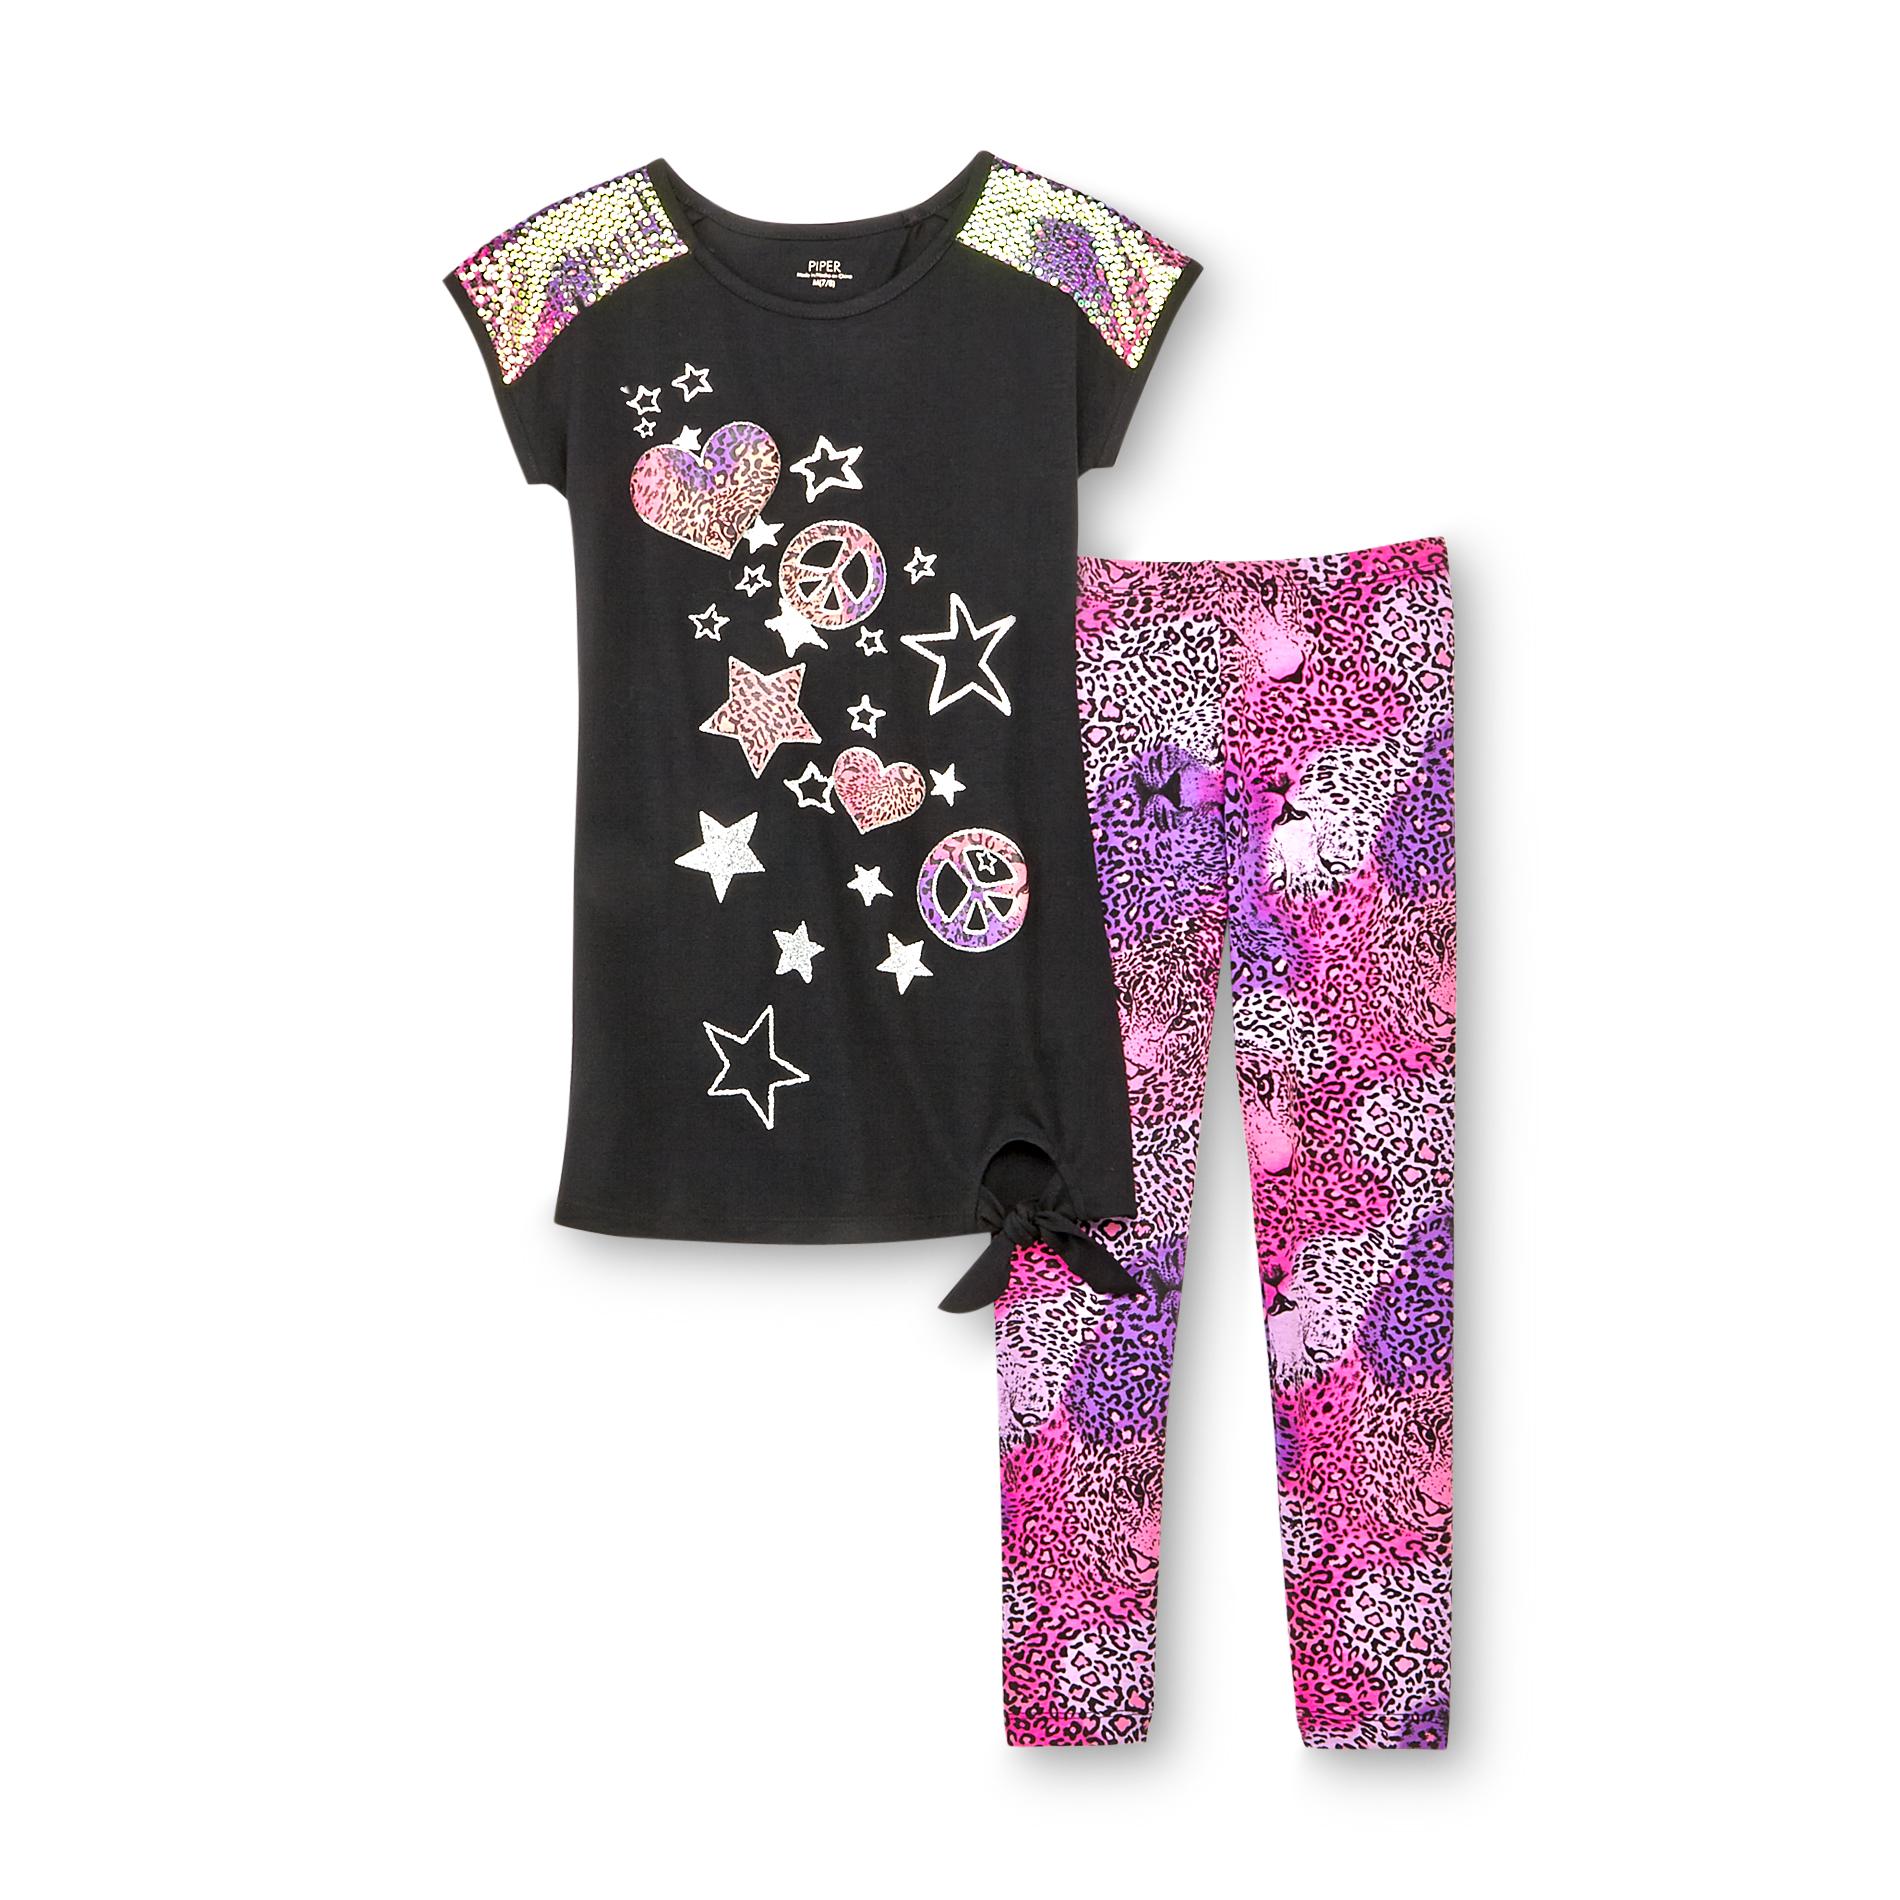 Piper Girl's Graphic T-Shirt & Leggings - Hearts  Peace Signs & Leopard Print